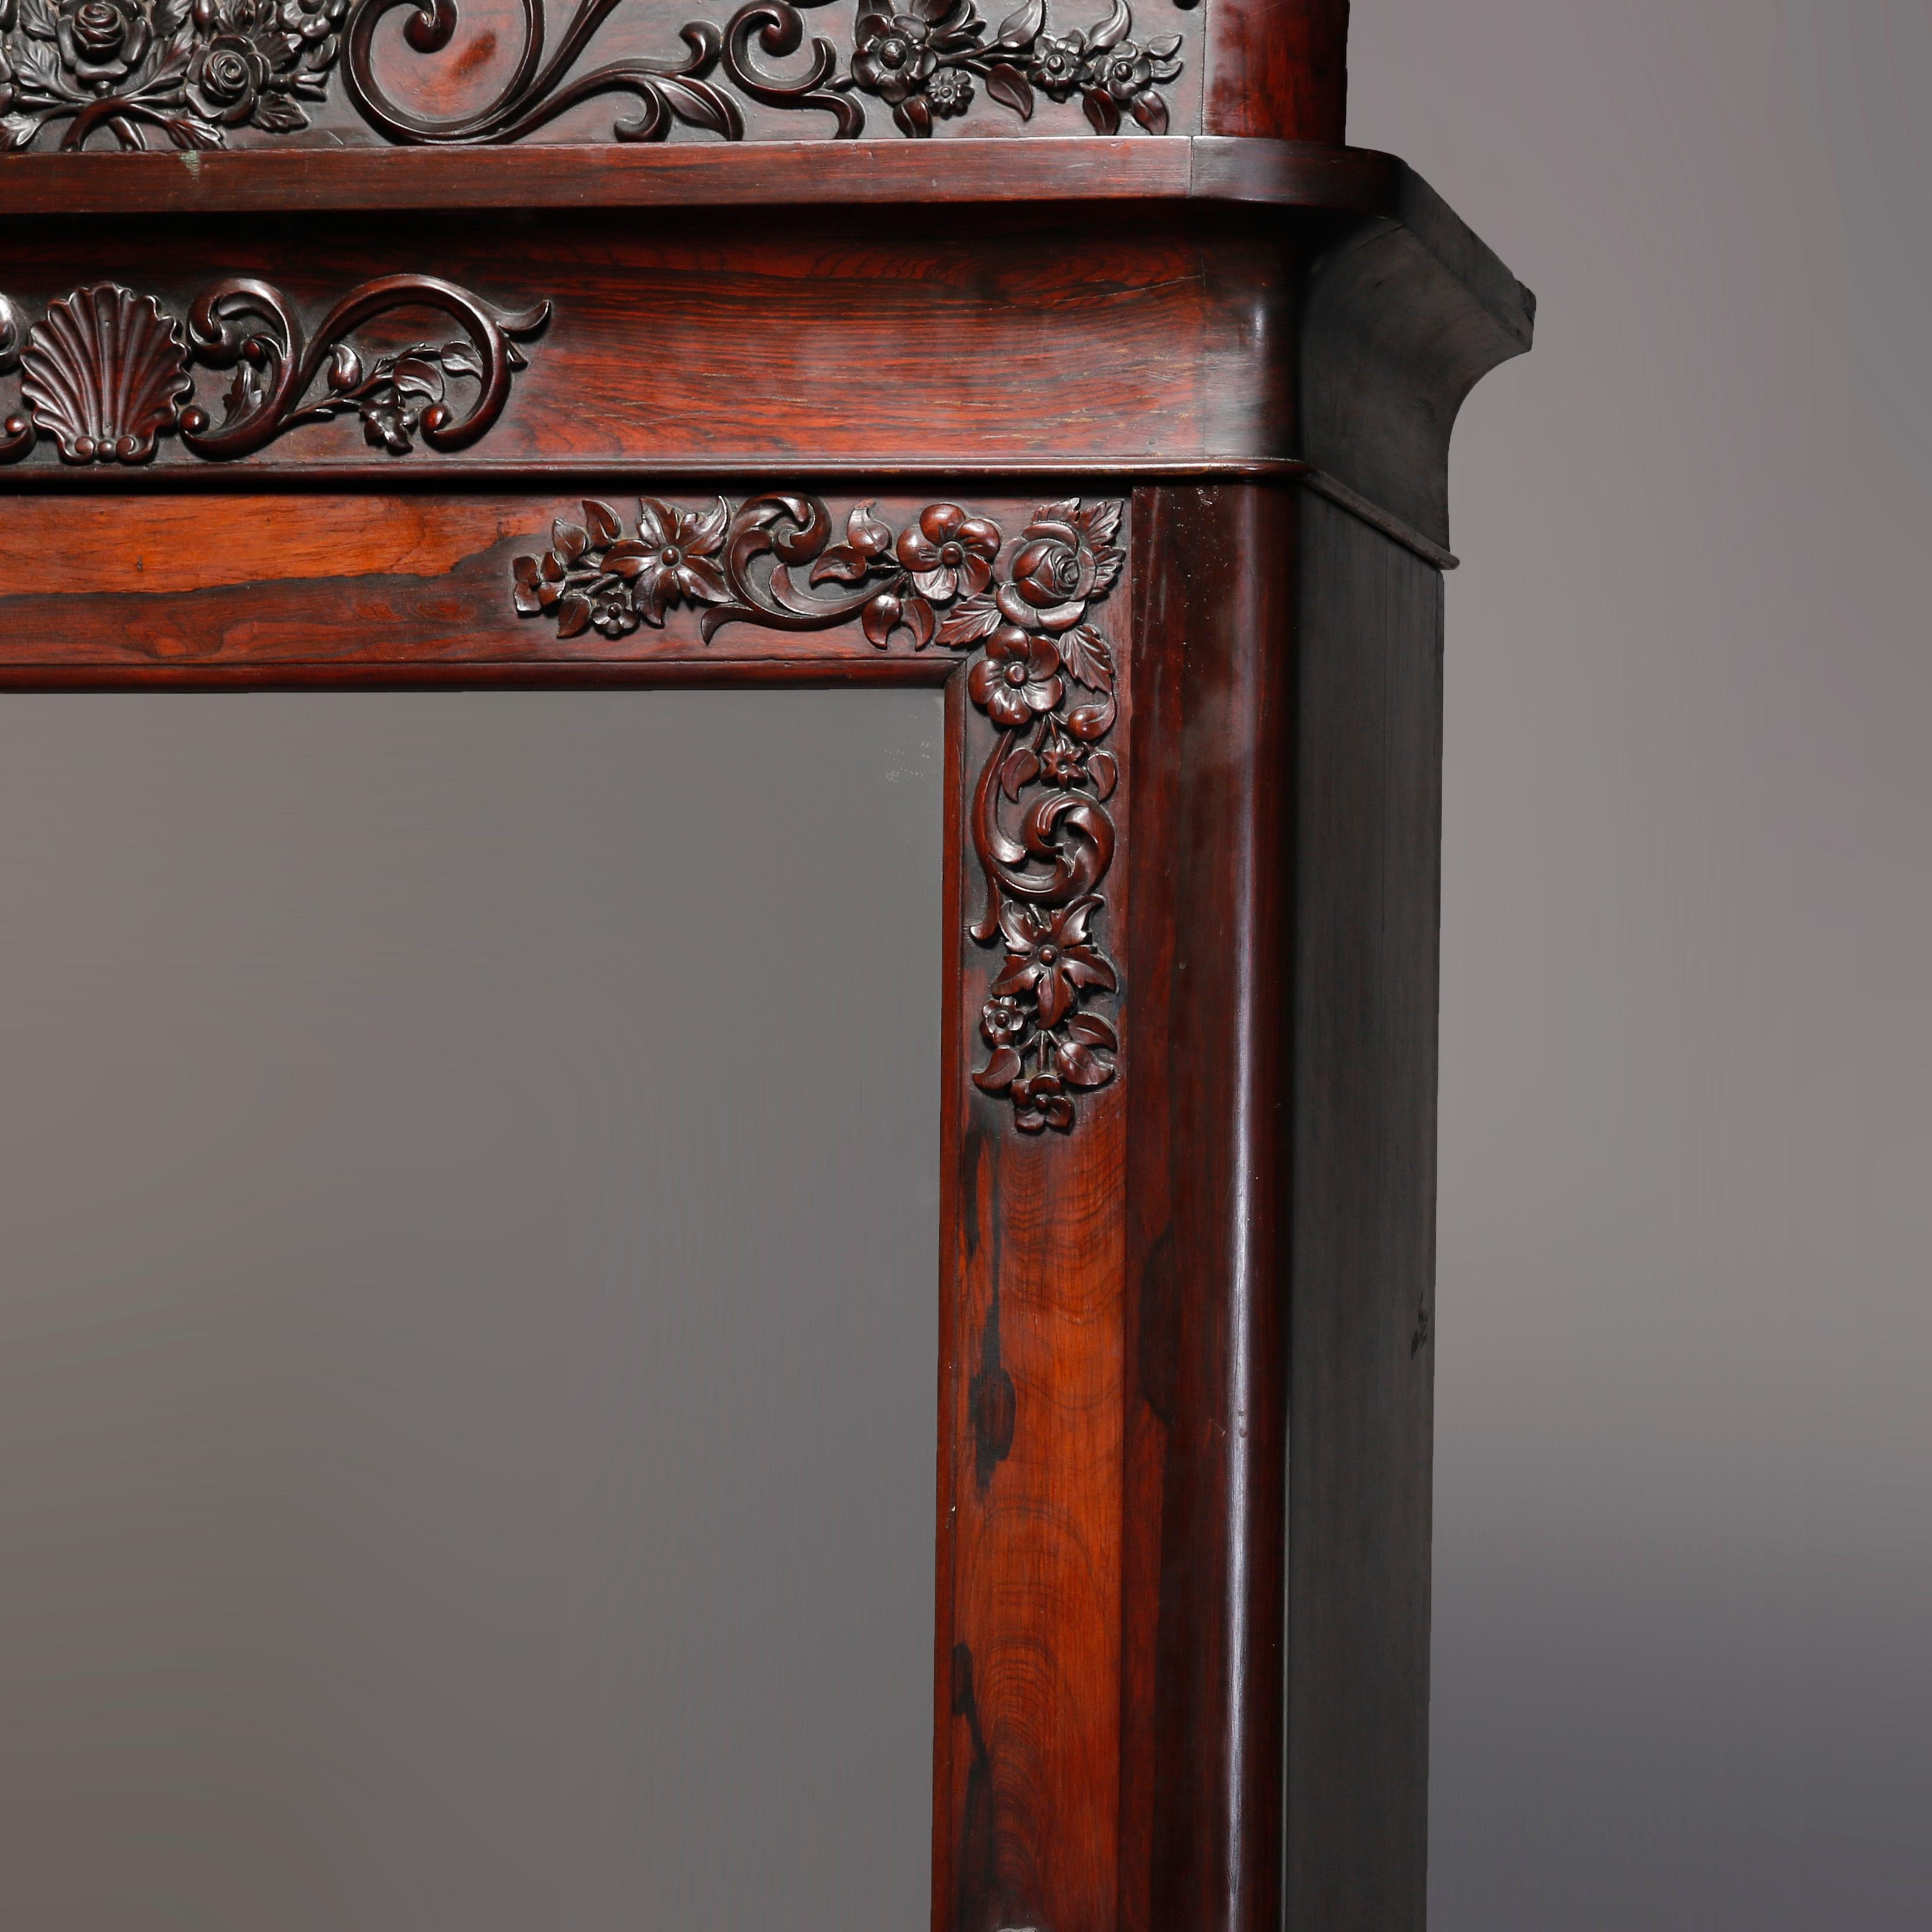 Antique Rococo Revival Carved Rosewood Mirrored Armoire, circa 1860 6